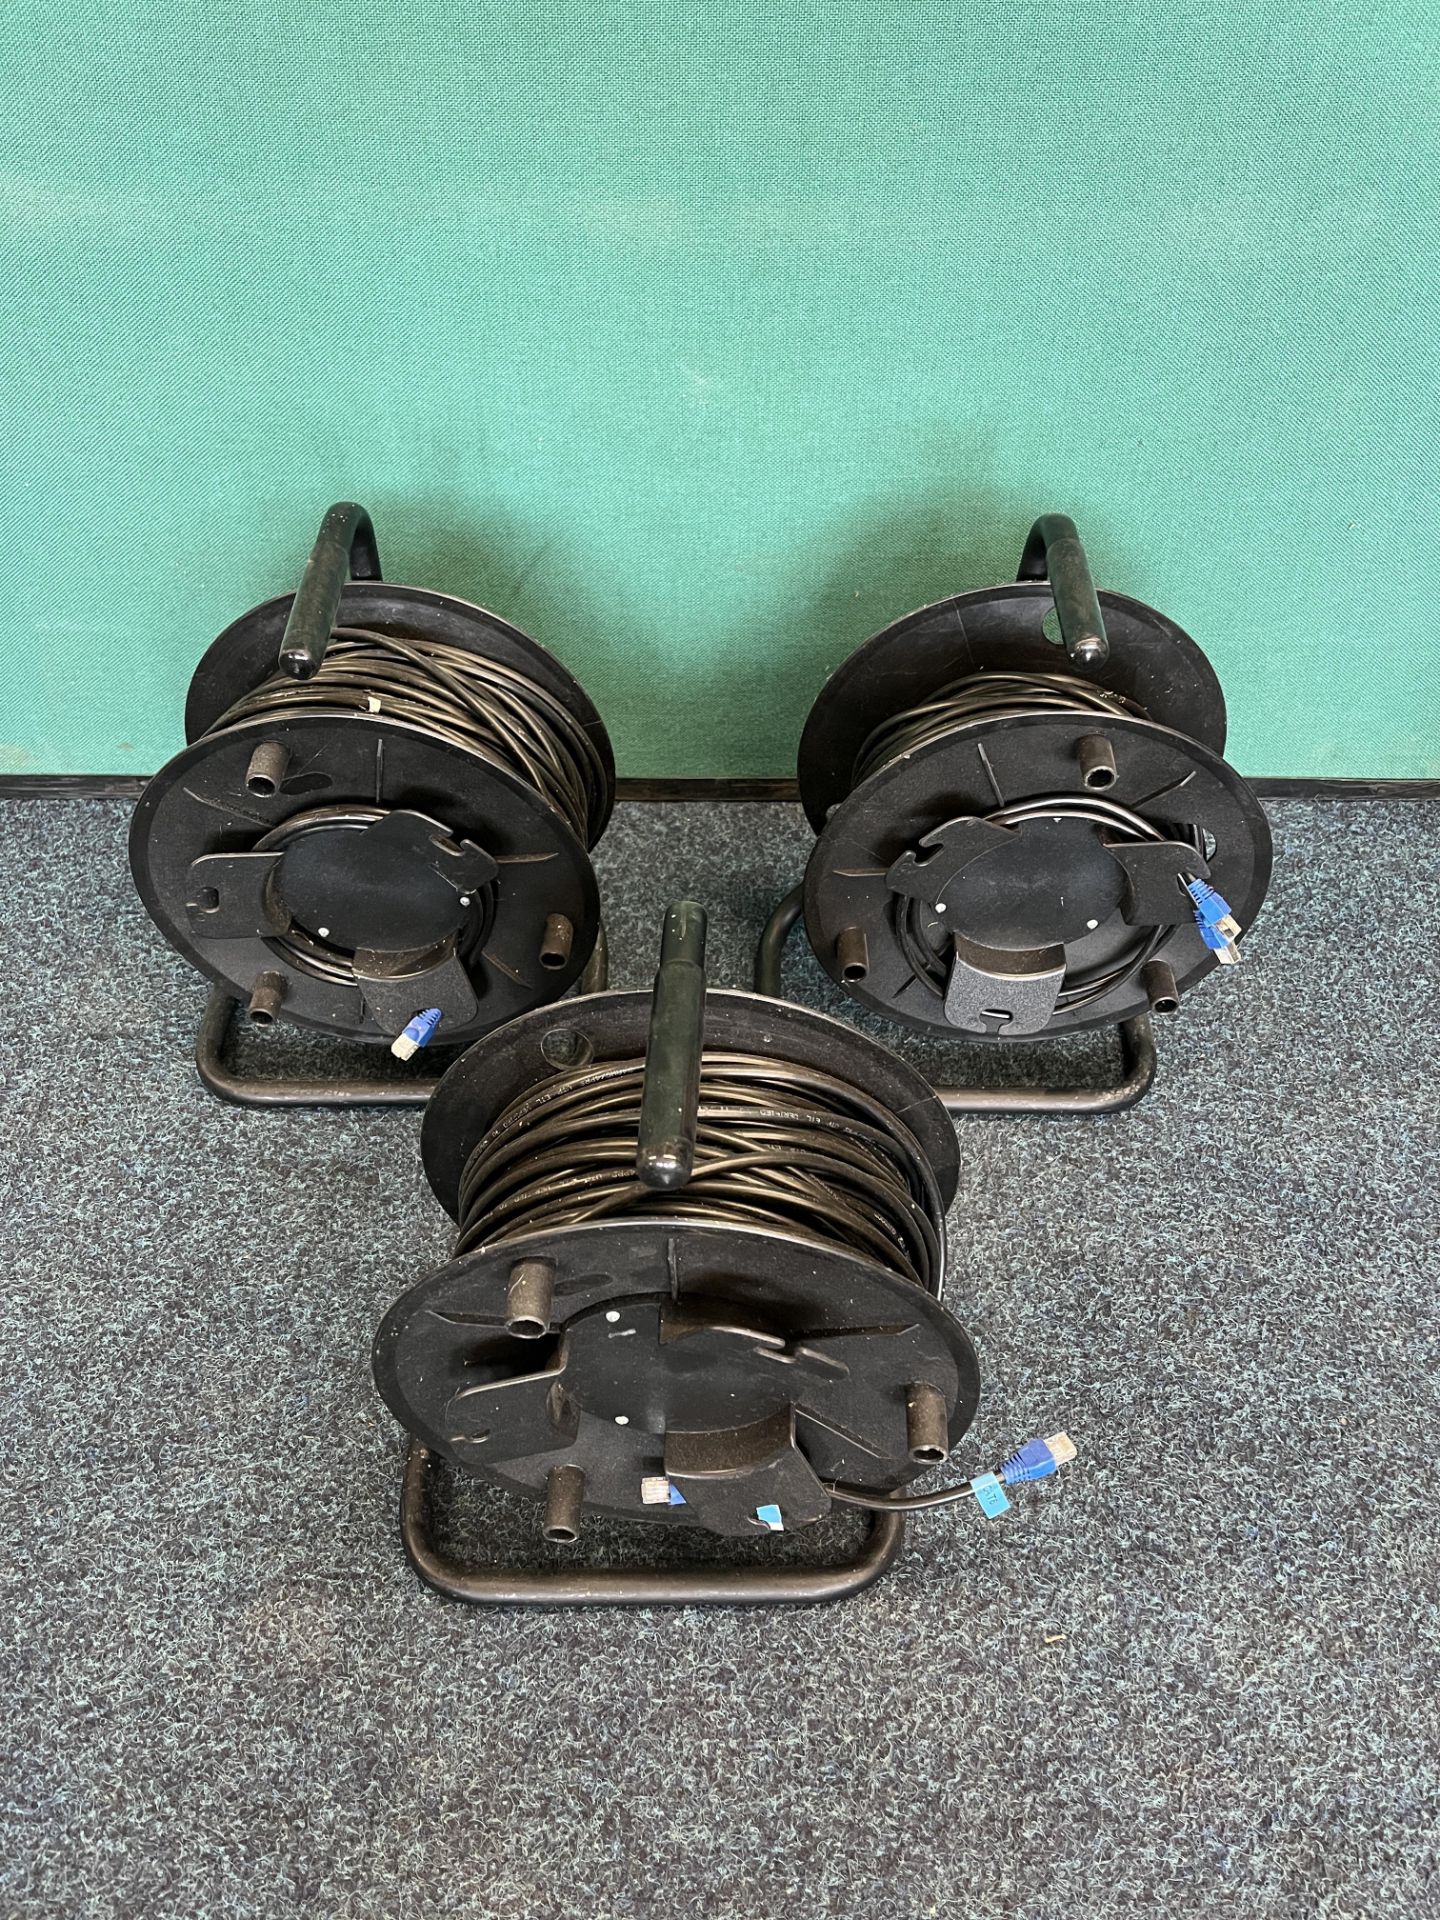 3 x Network Cable Reels